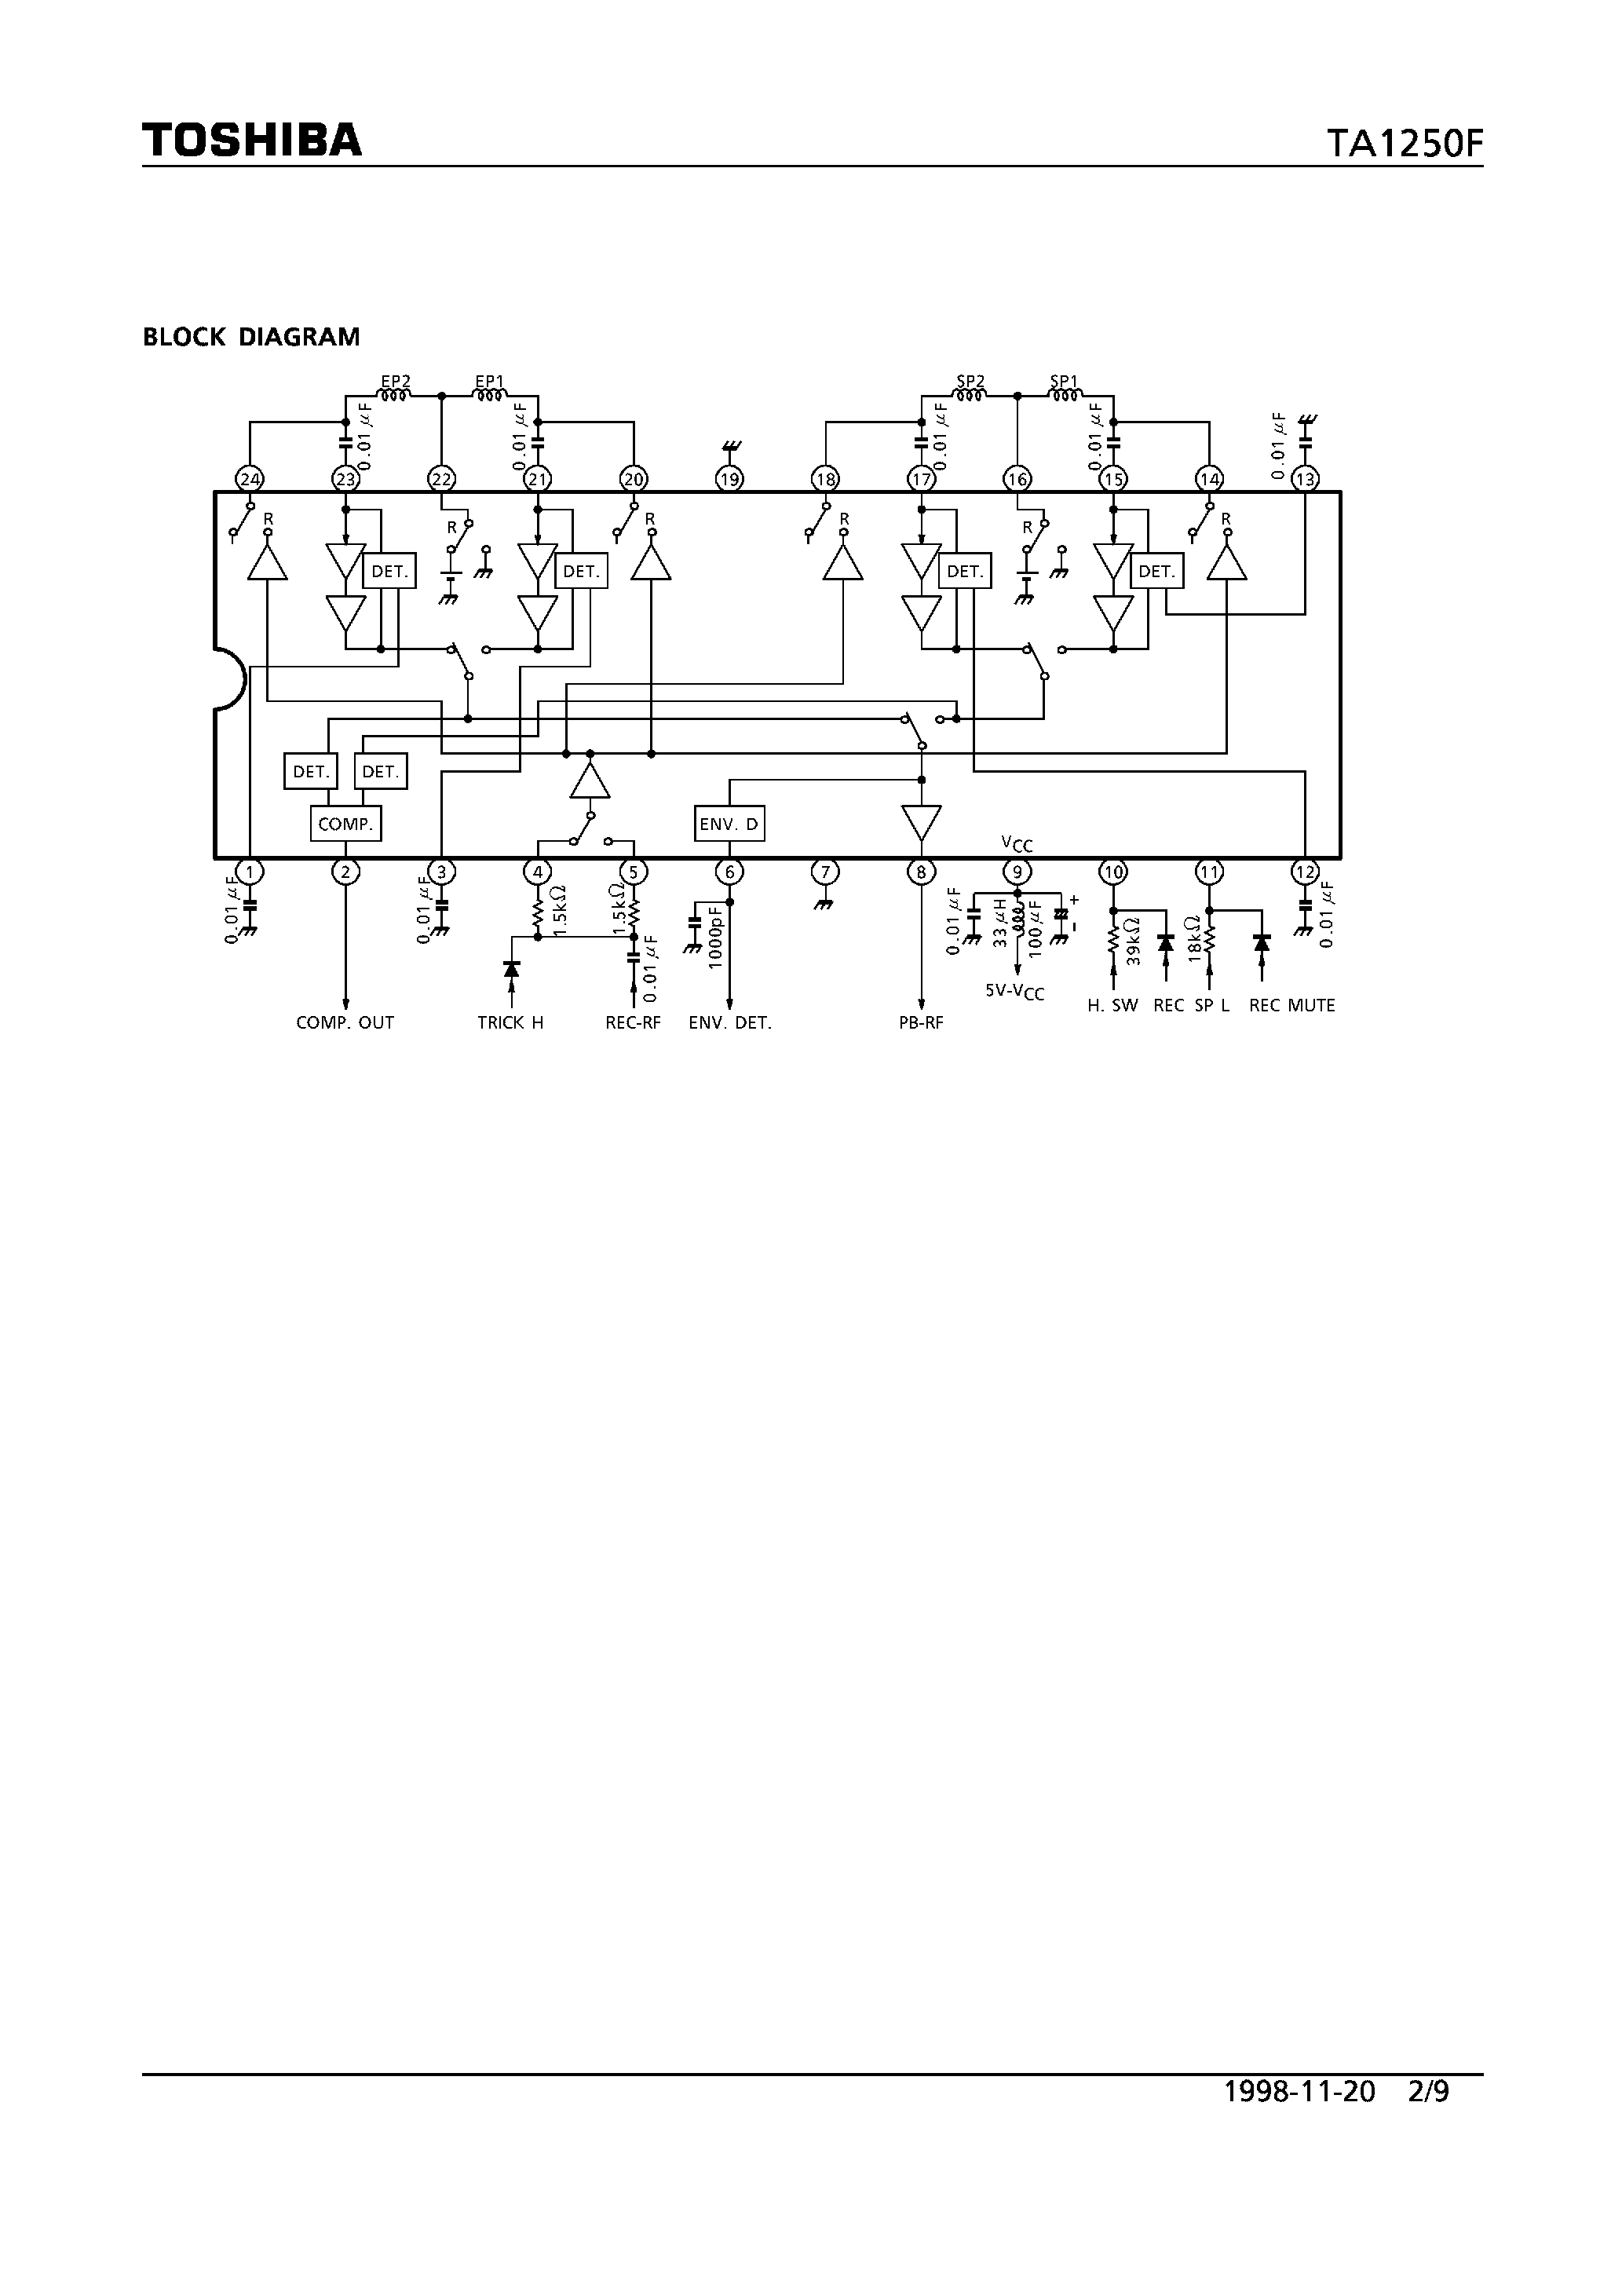 Datasheet TA1250F - 4-CHANNEL RECORDING AMPLIFIER & PRE-AMPLIFIER FOR VCR page 2